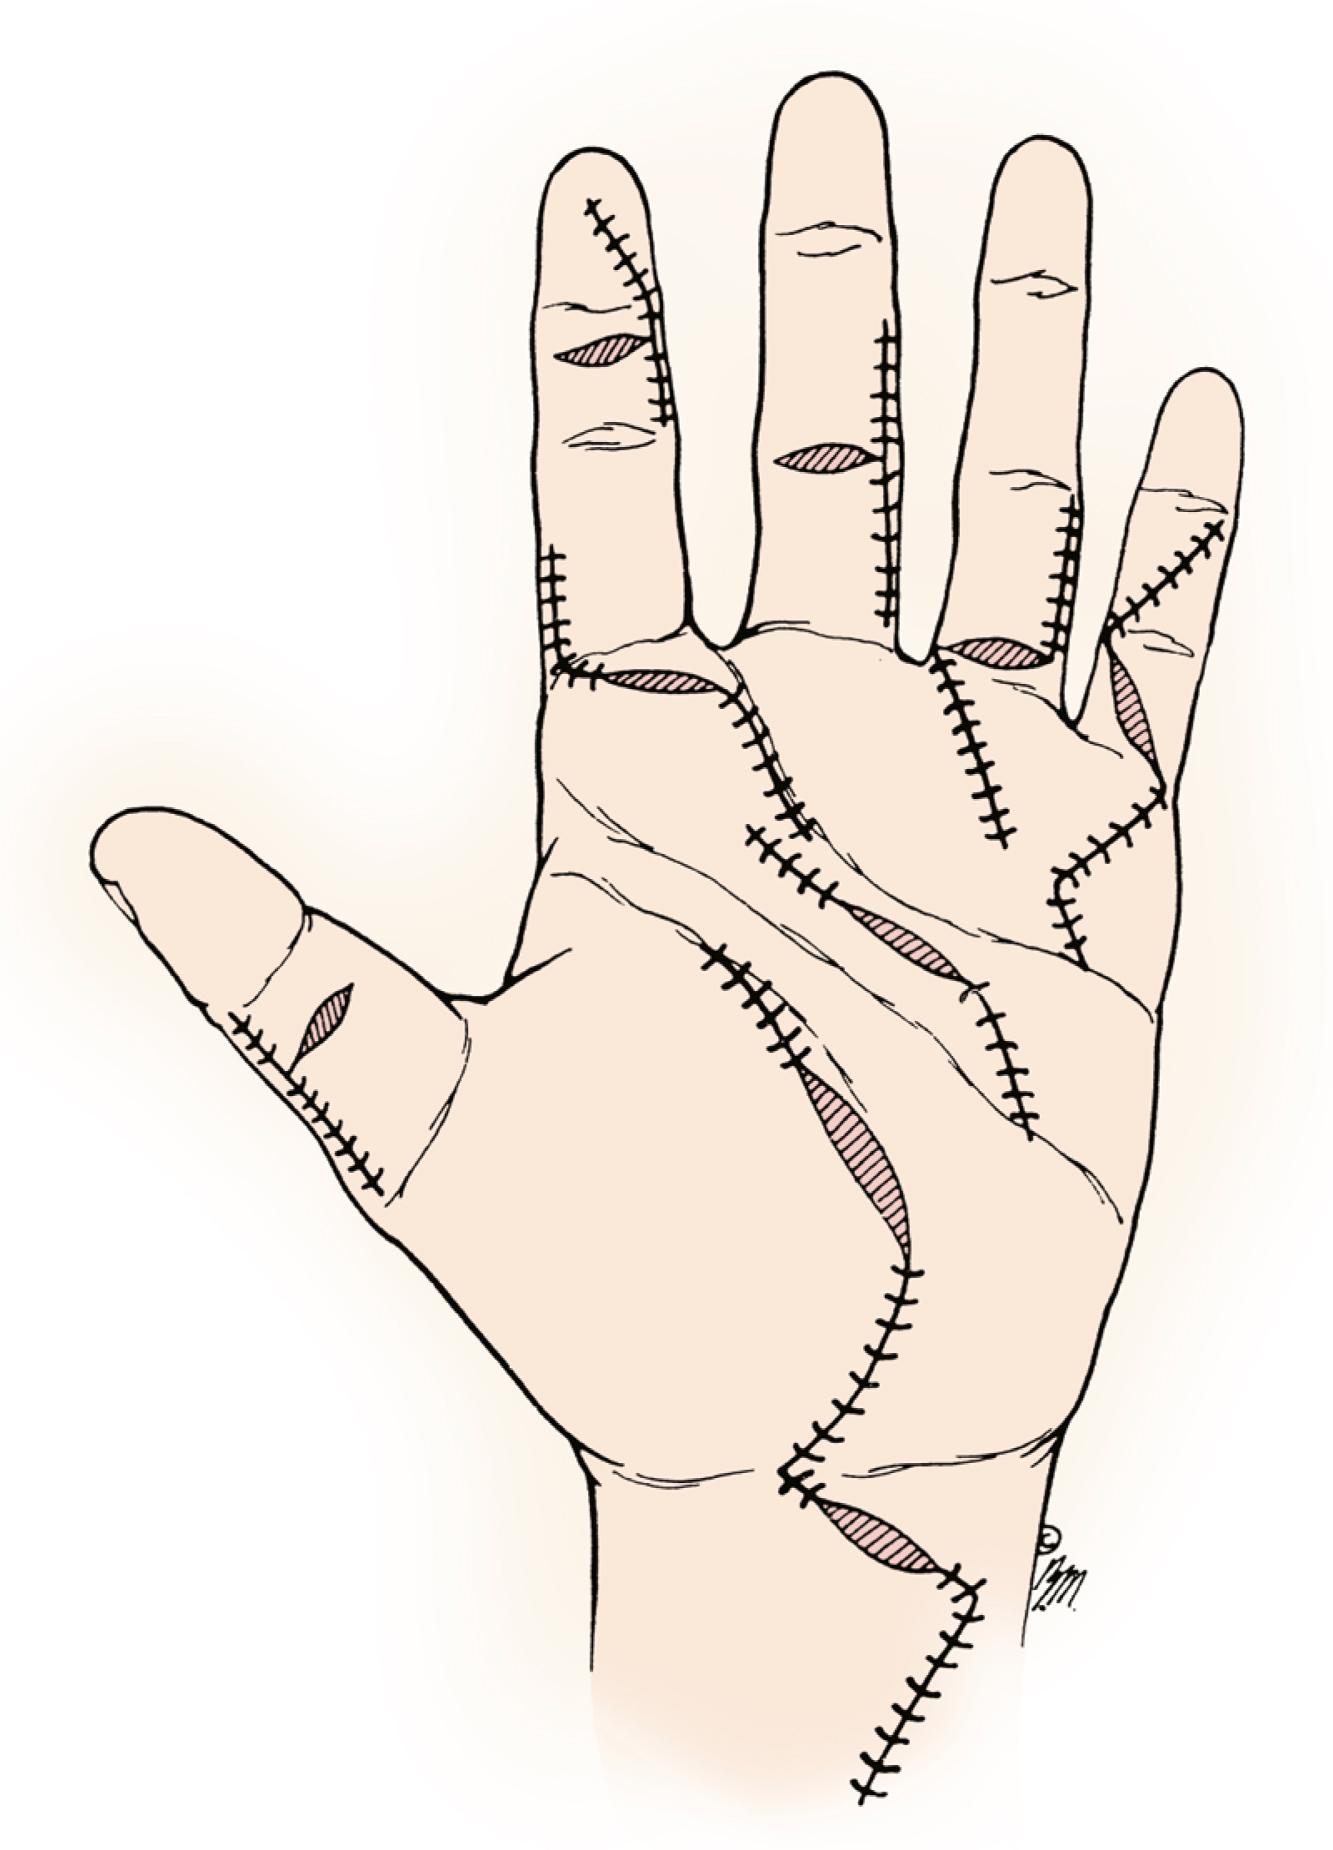 Fig. 6.14, Incision options for wound extension during flexor tendon repair.